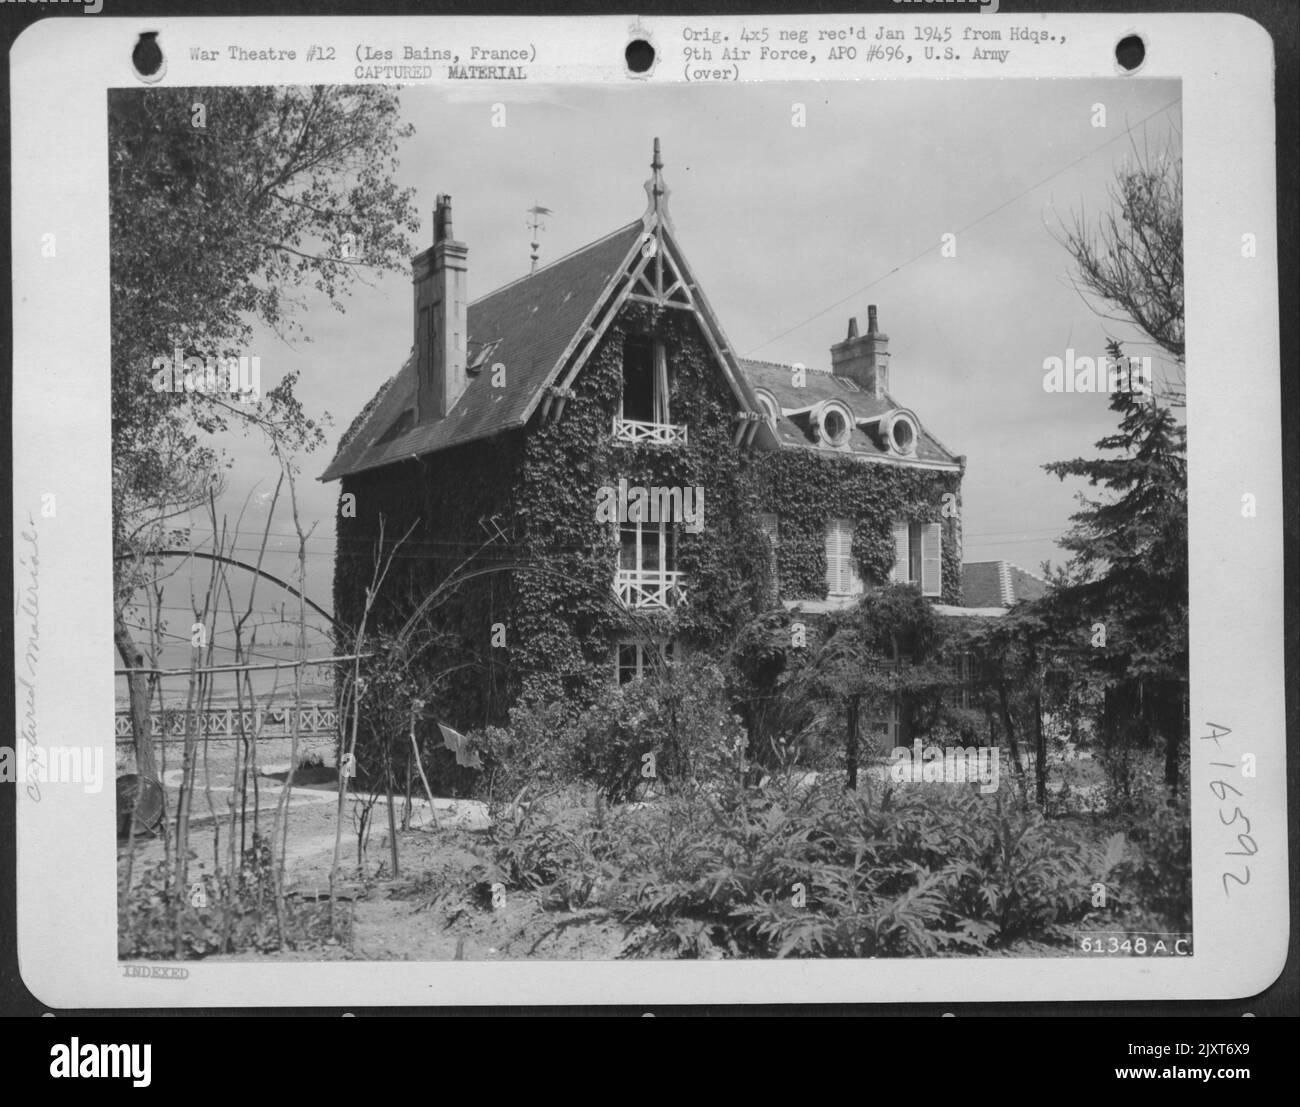 The Former Home Of A French Collaborator With The Nazis. Being A Contractor He Managed To Find Enough Material To Build And Furnish A Home For The Germans In The Cherbroug Peninsula. On D-Day The Collaborator'S Home Was Untouched By Shell Fire Which Mad Stock Photo